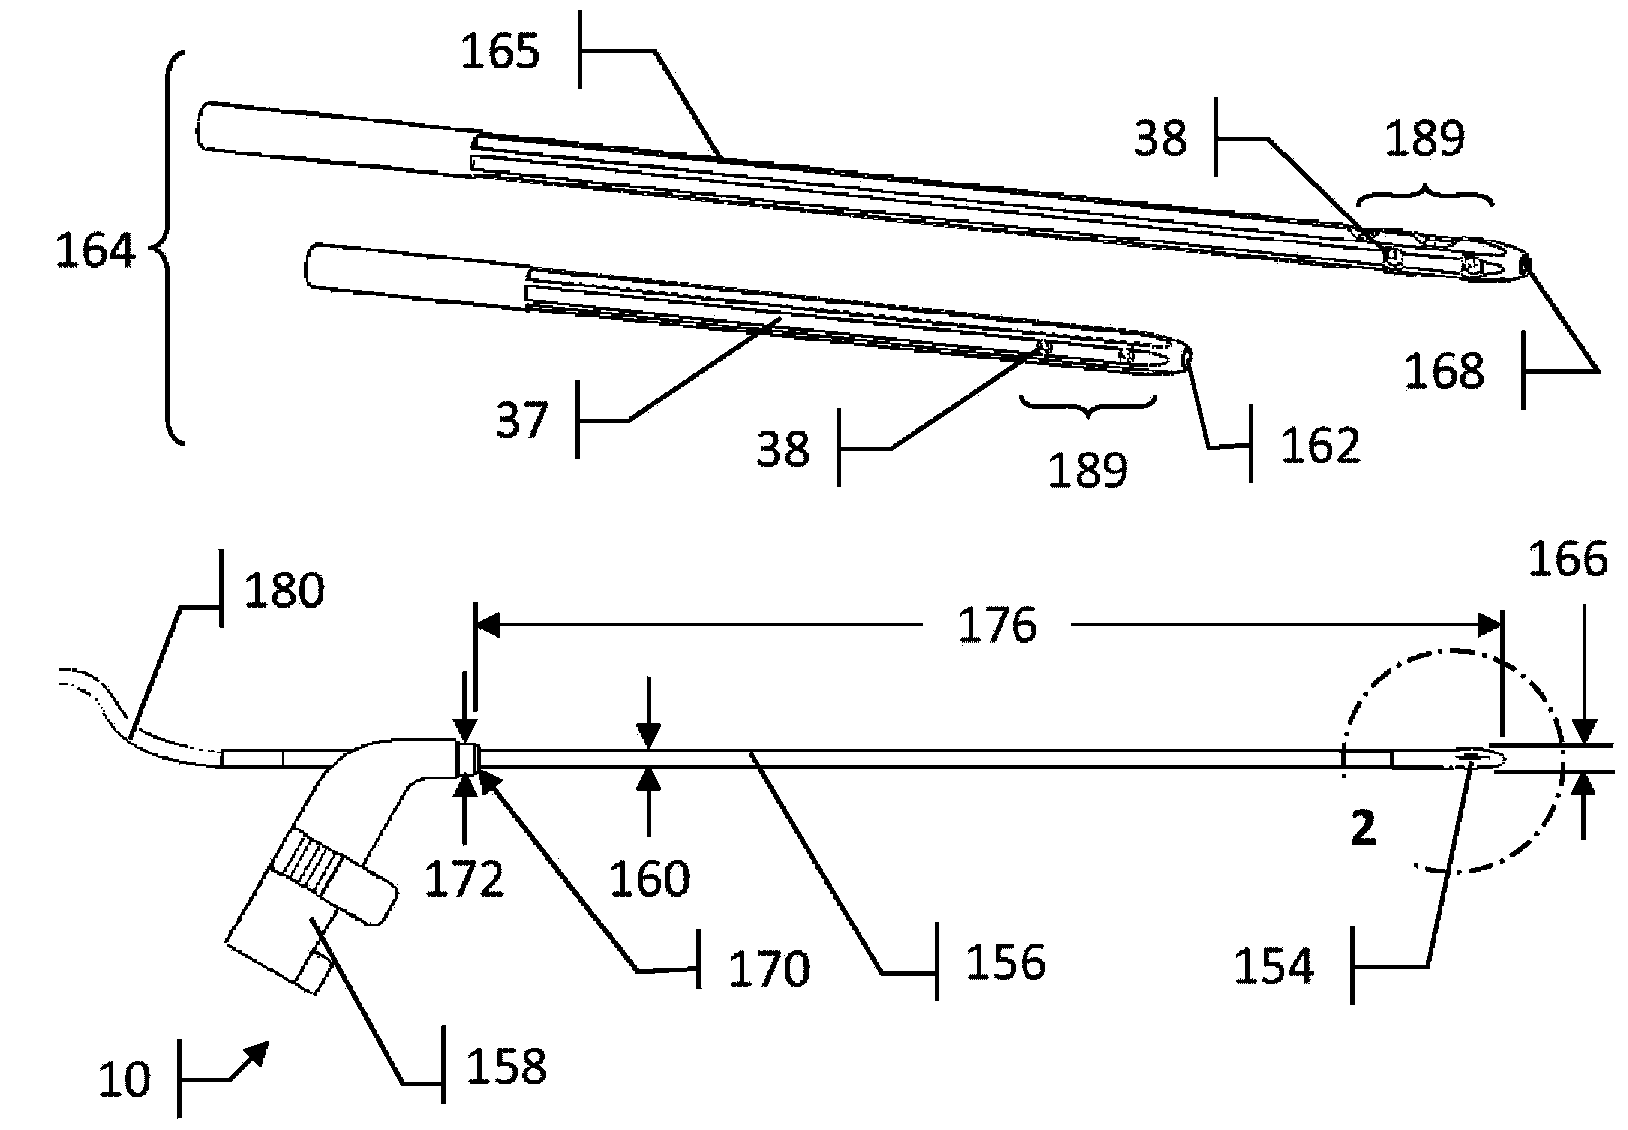 Tool with integrated navigation and guidance system and related apparatus and methods